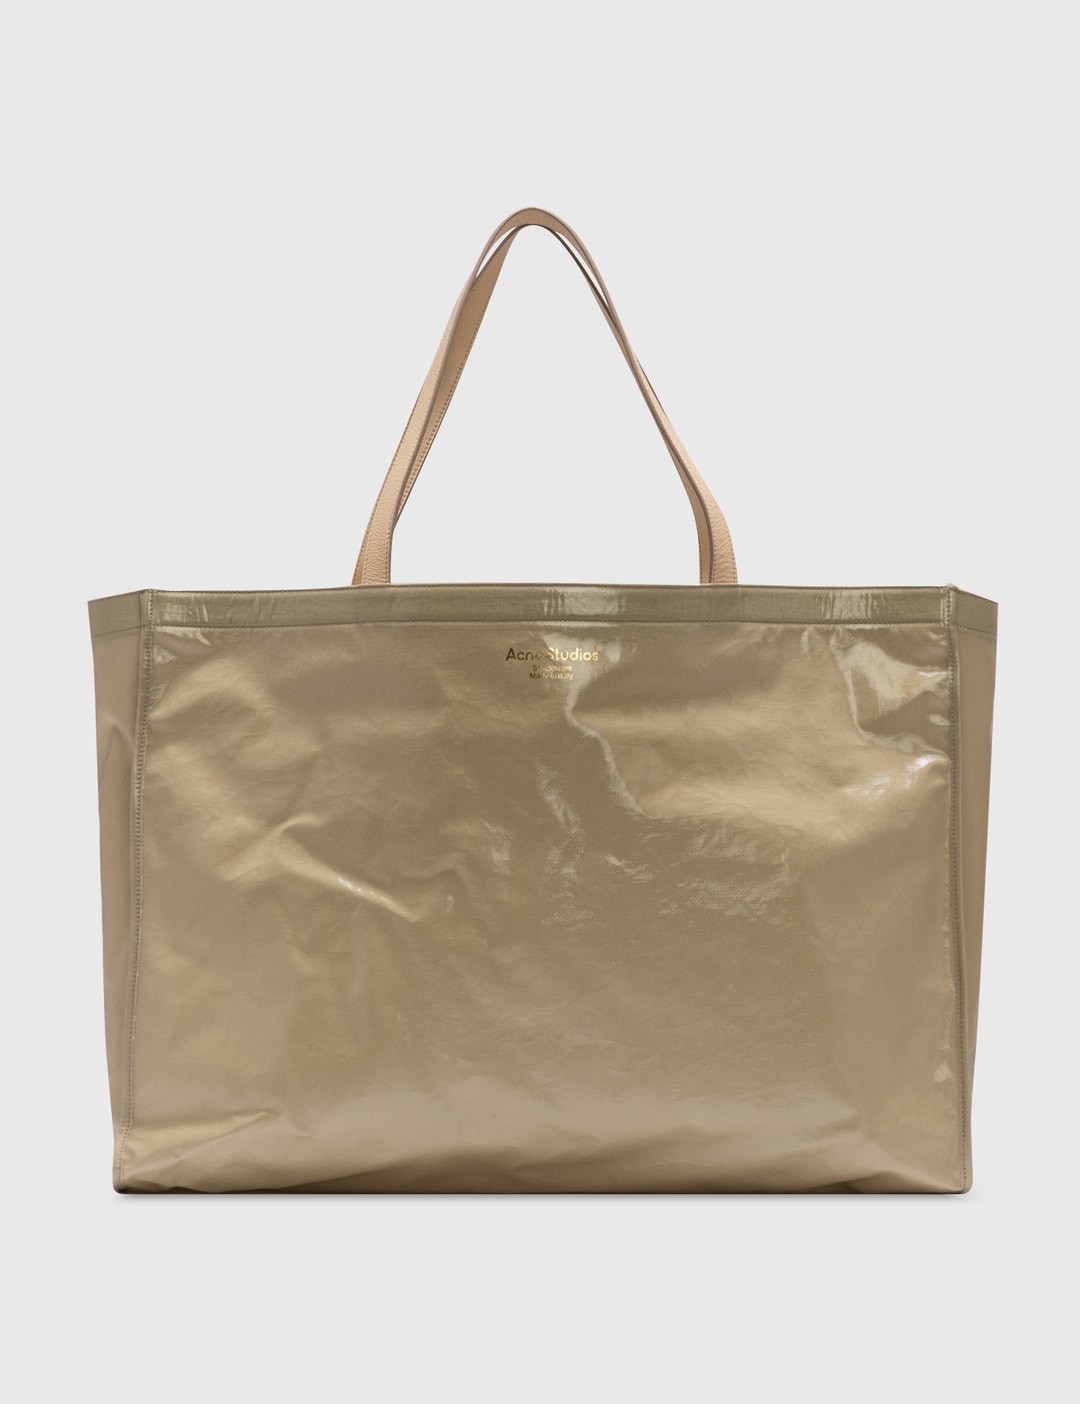 Acne Studios - Agele Solid Tote Bag HBX - Globally Curated Fashion Lifestyle by Hypebeast